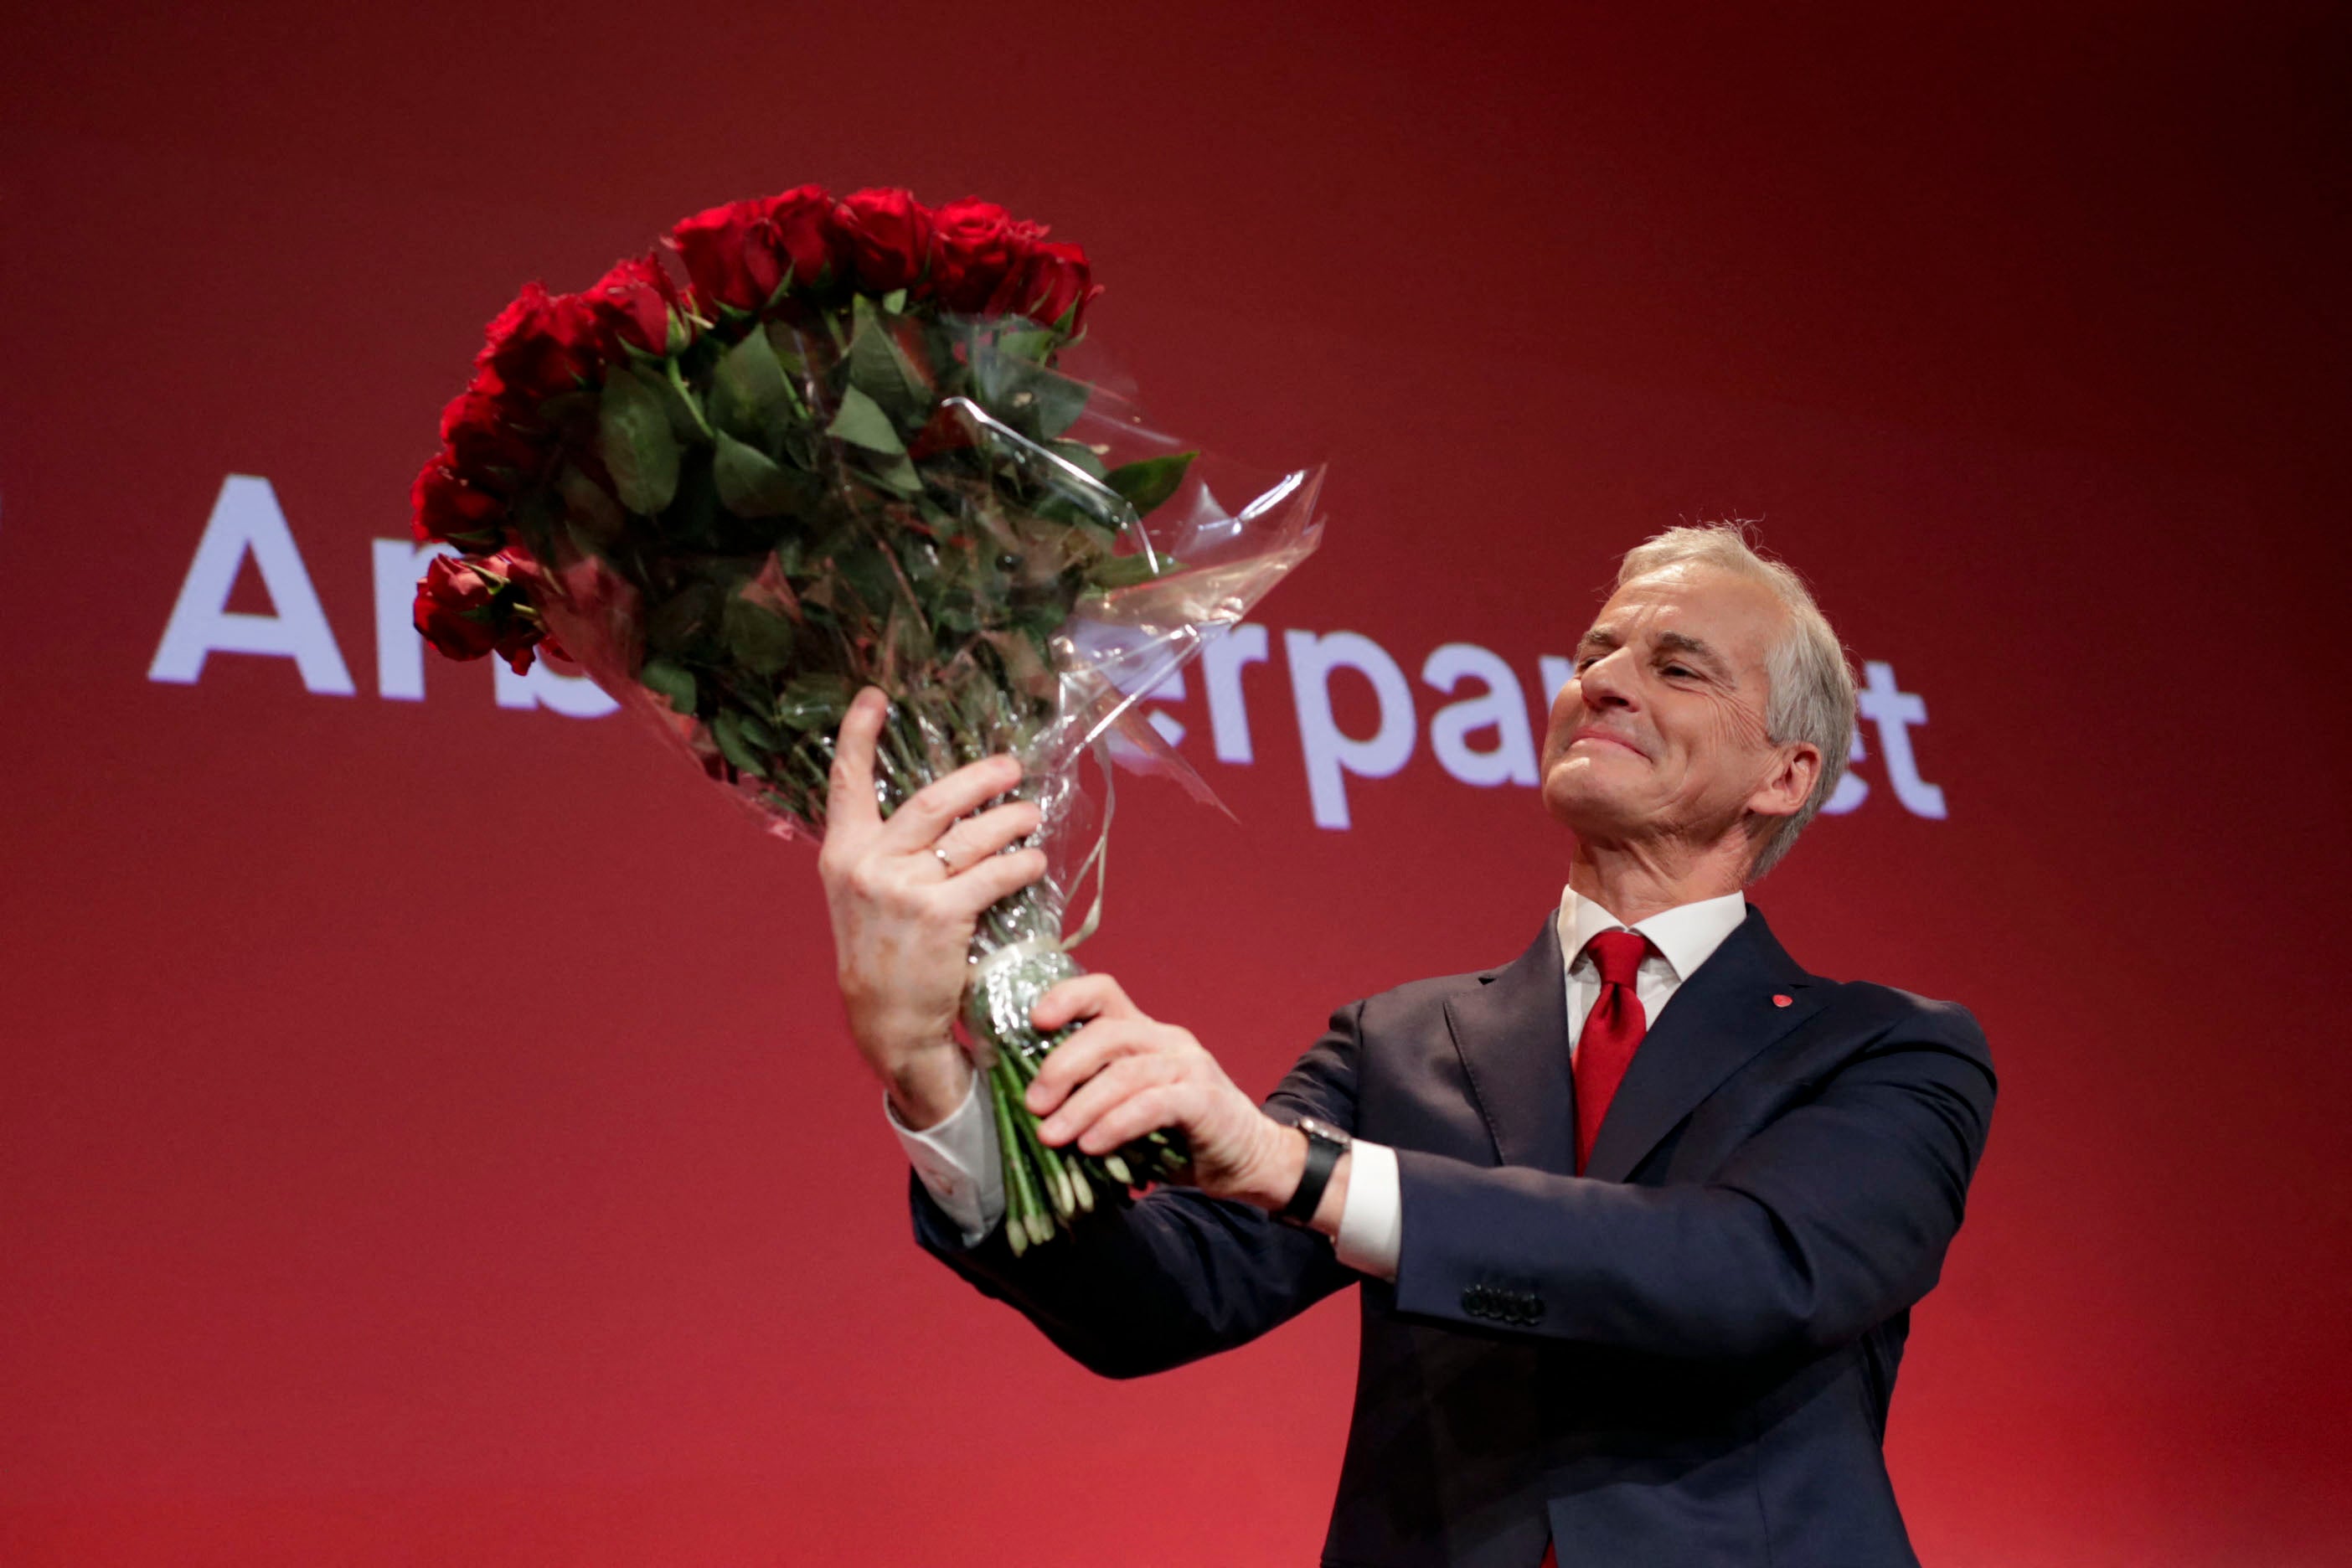 Labour leader Jonas Gahr Store holds a bouquet of red roses after the results of the election